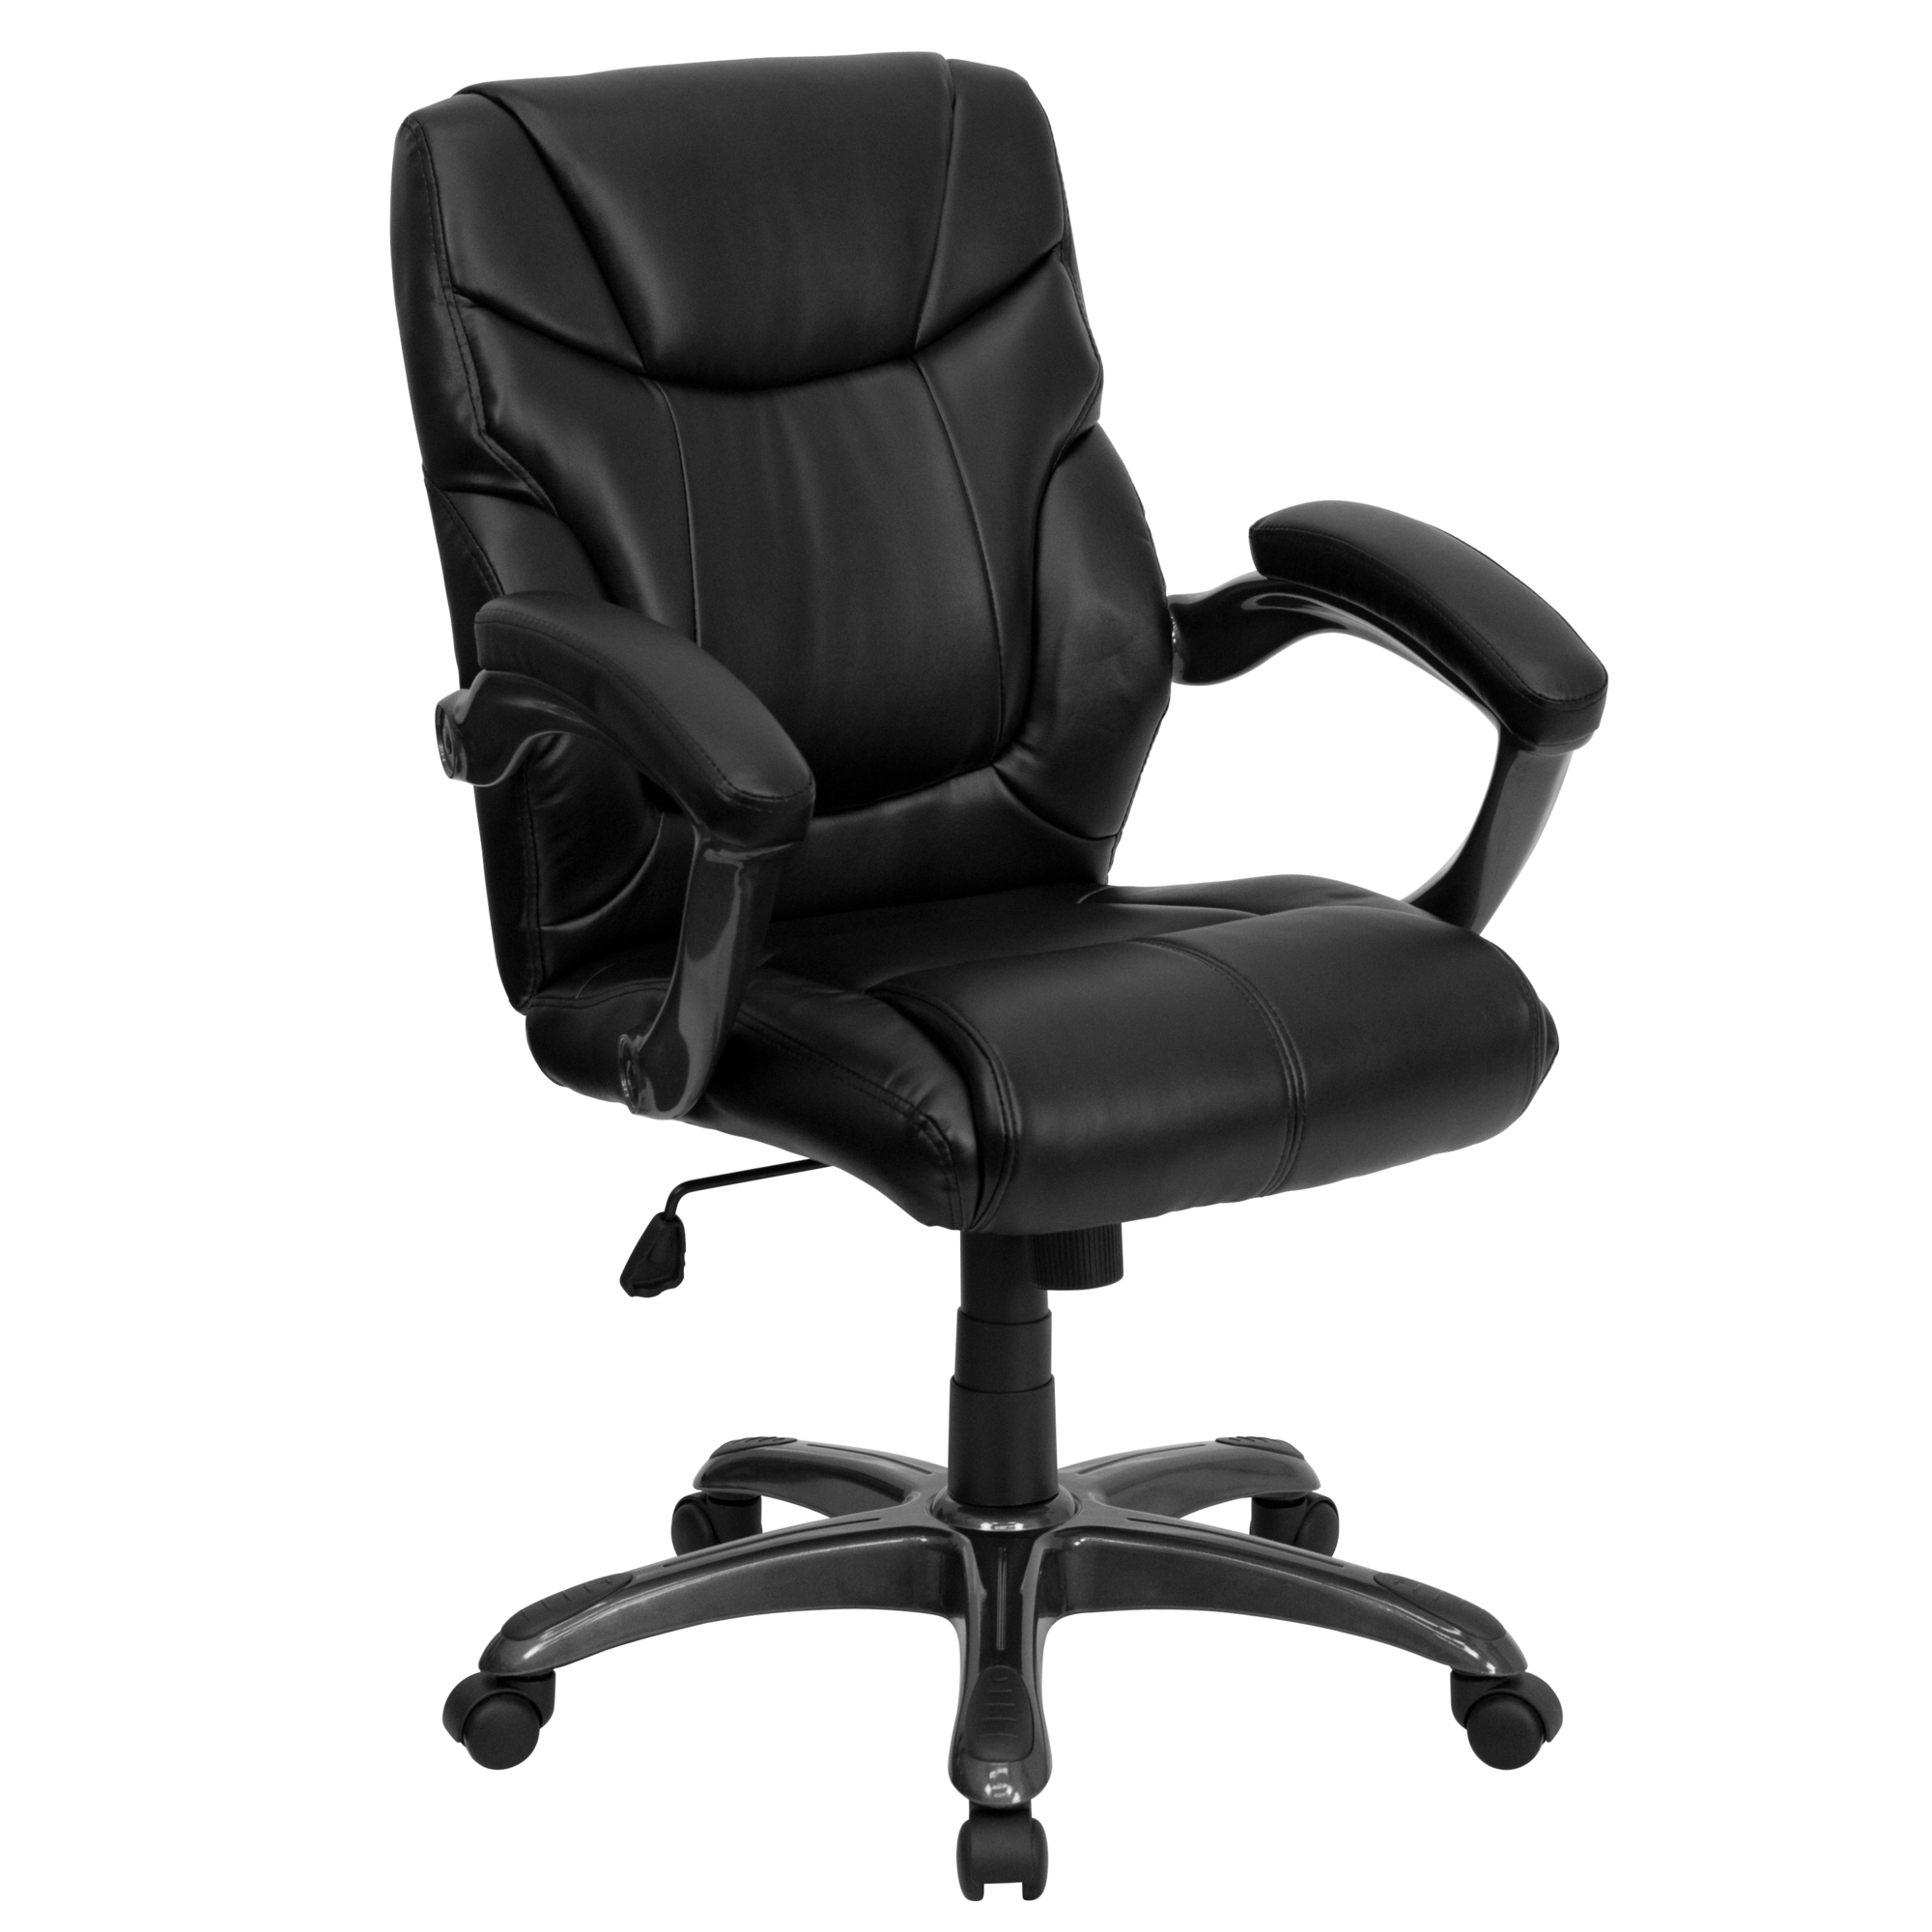 Flash Furniture, Mid-Back Black LeatherSoft Overstuffed Chair, Primary Color Black, Included (qty.) 1, Model GO724MBKLEA